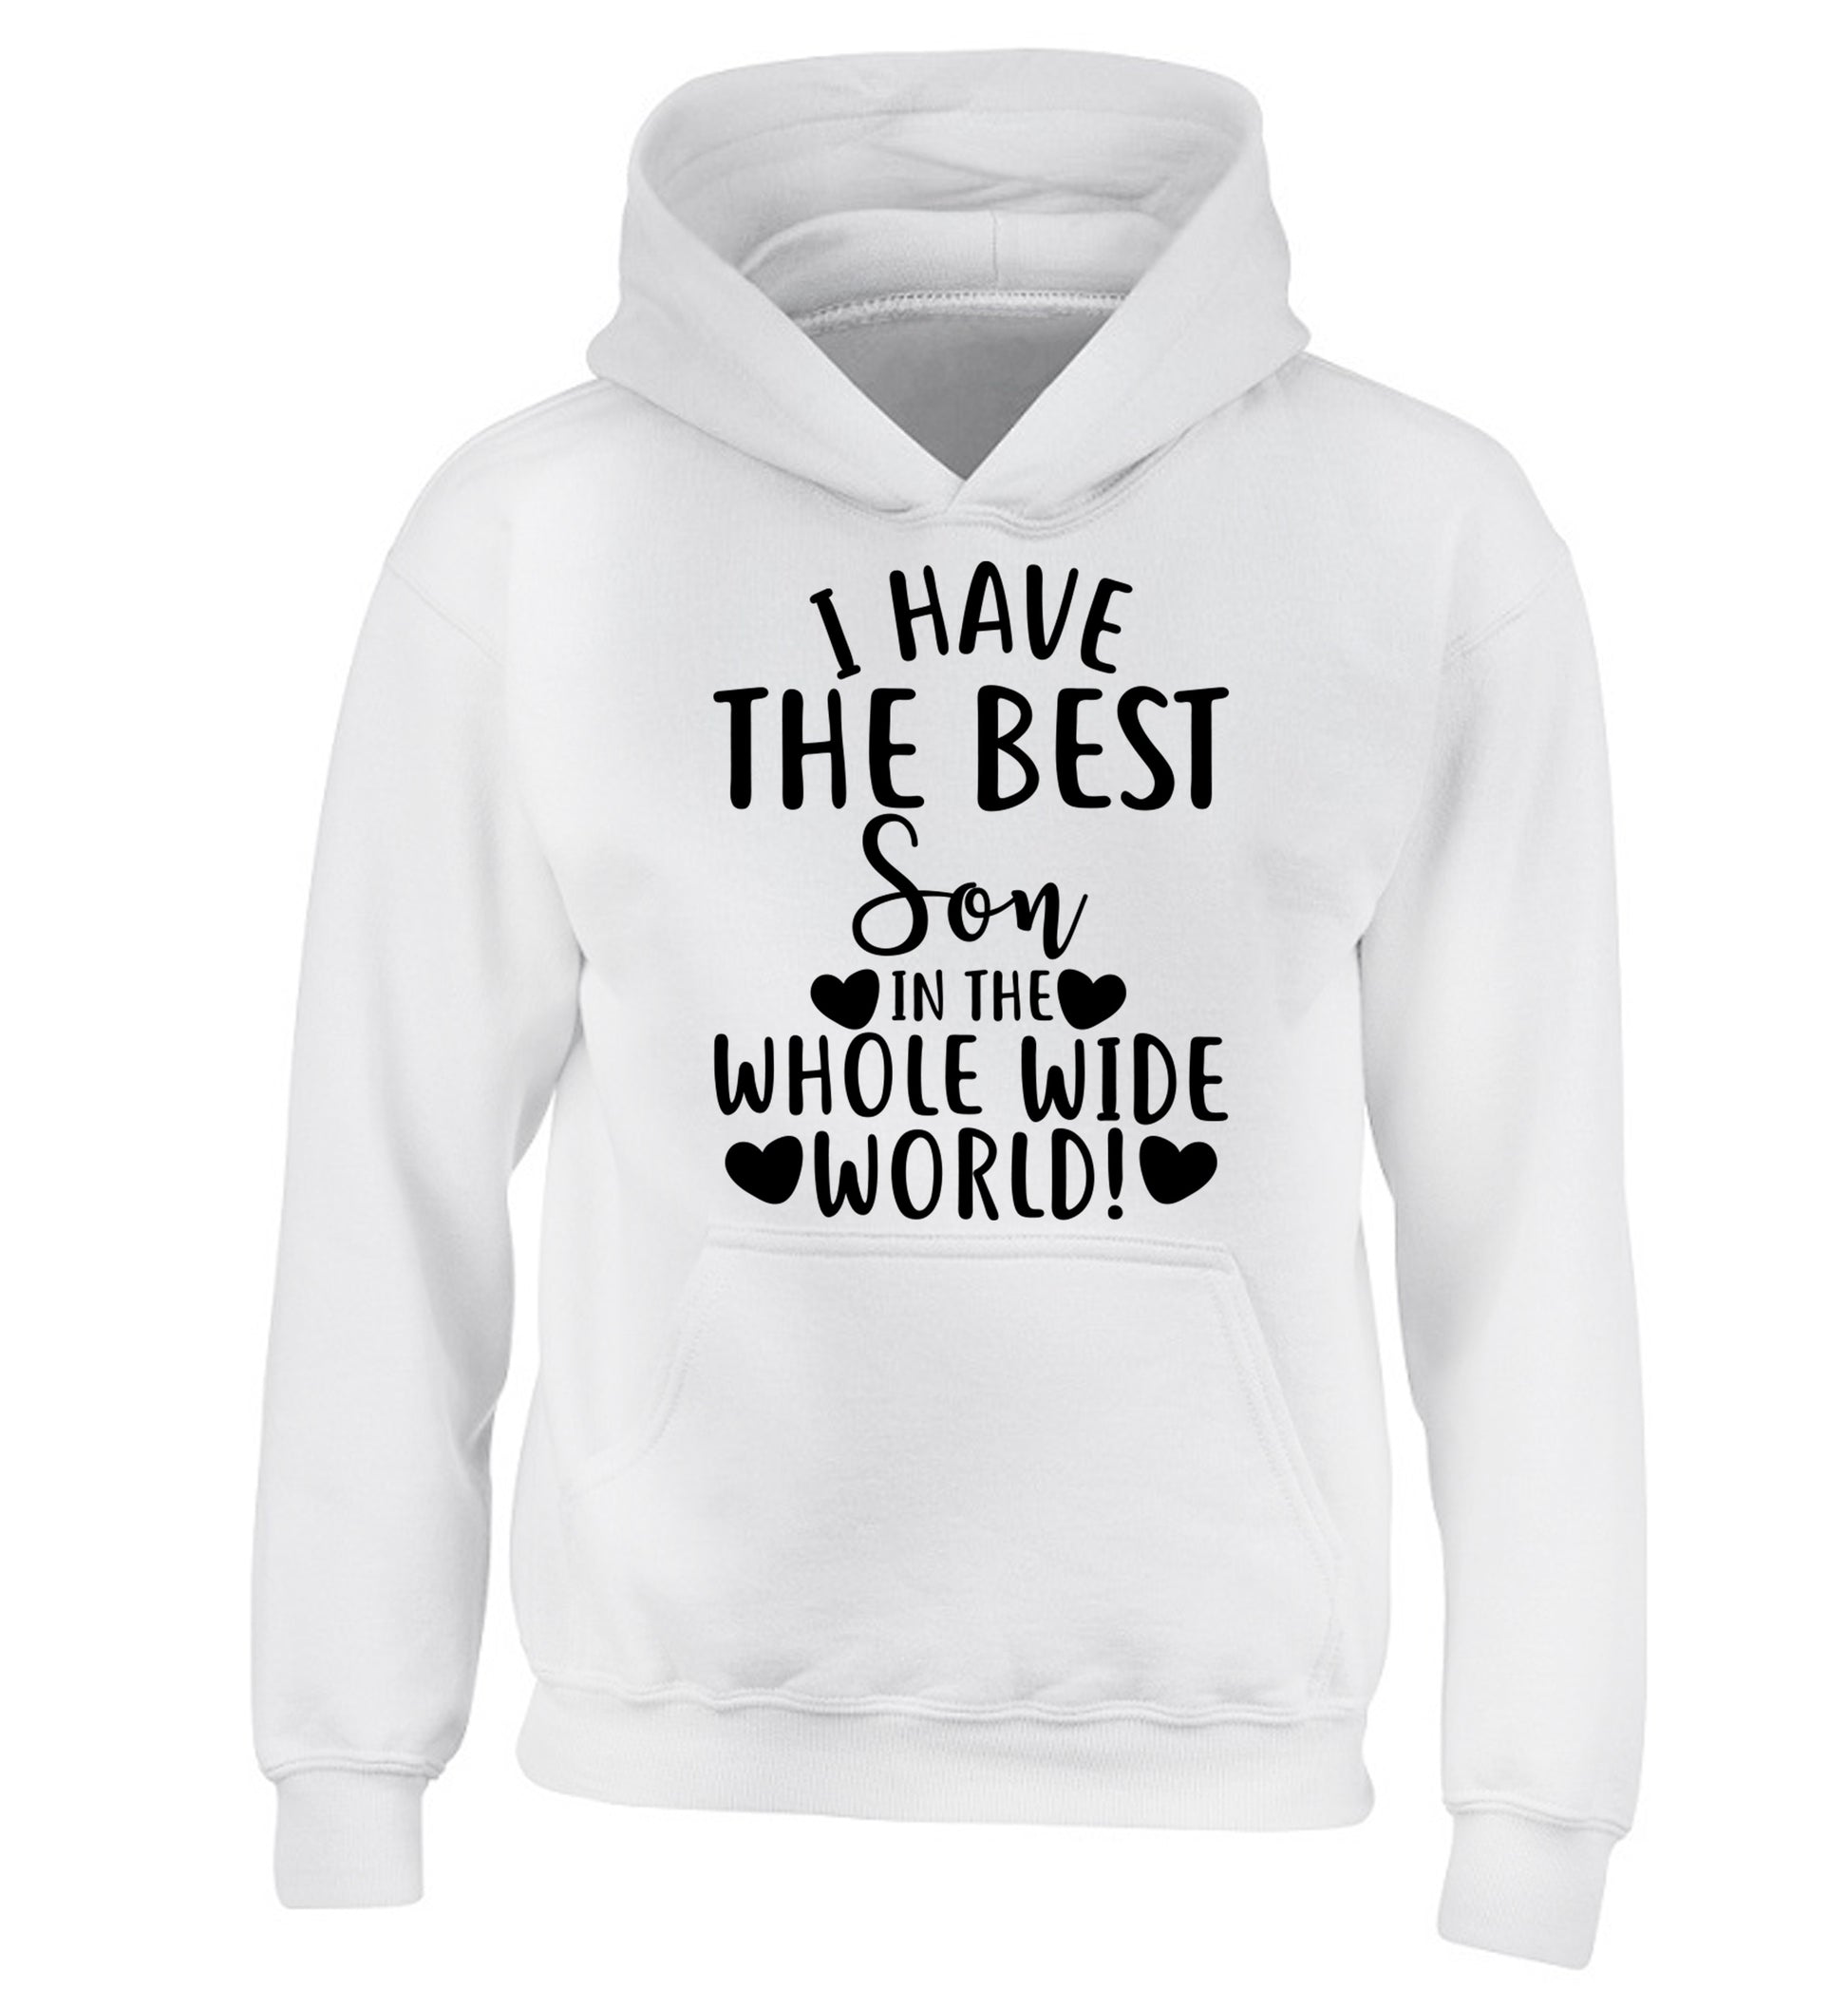 I have the best son in the whole wide world! children's white hoodie 12-13 Years